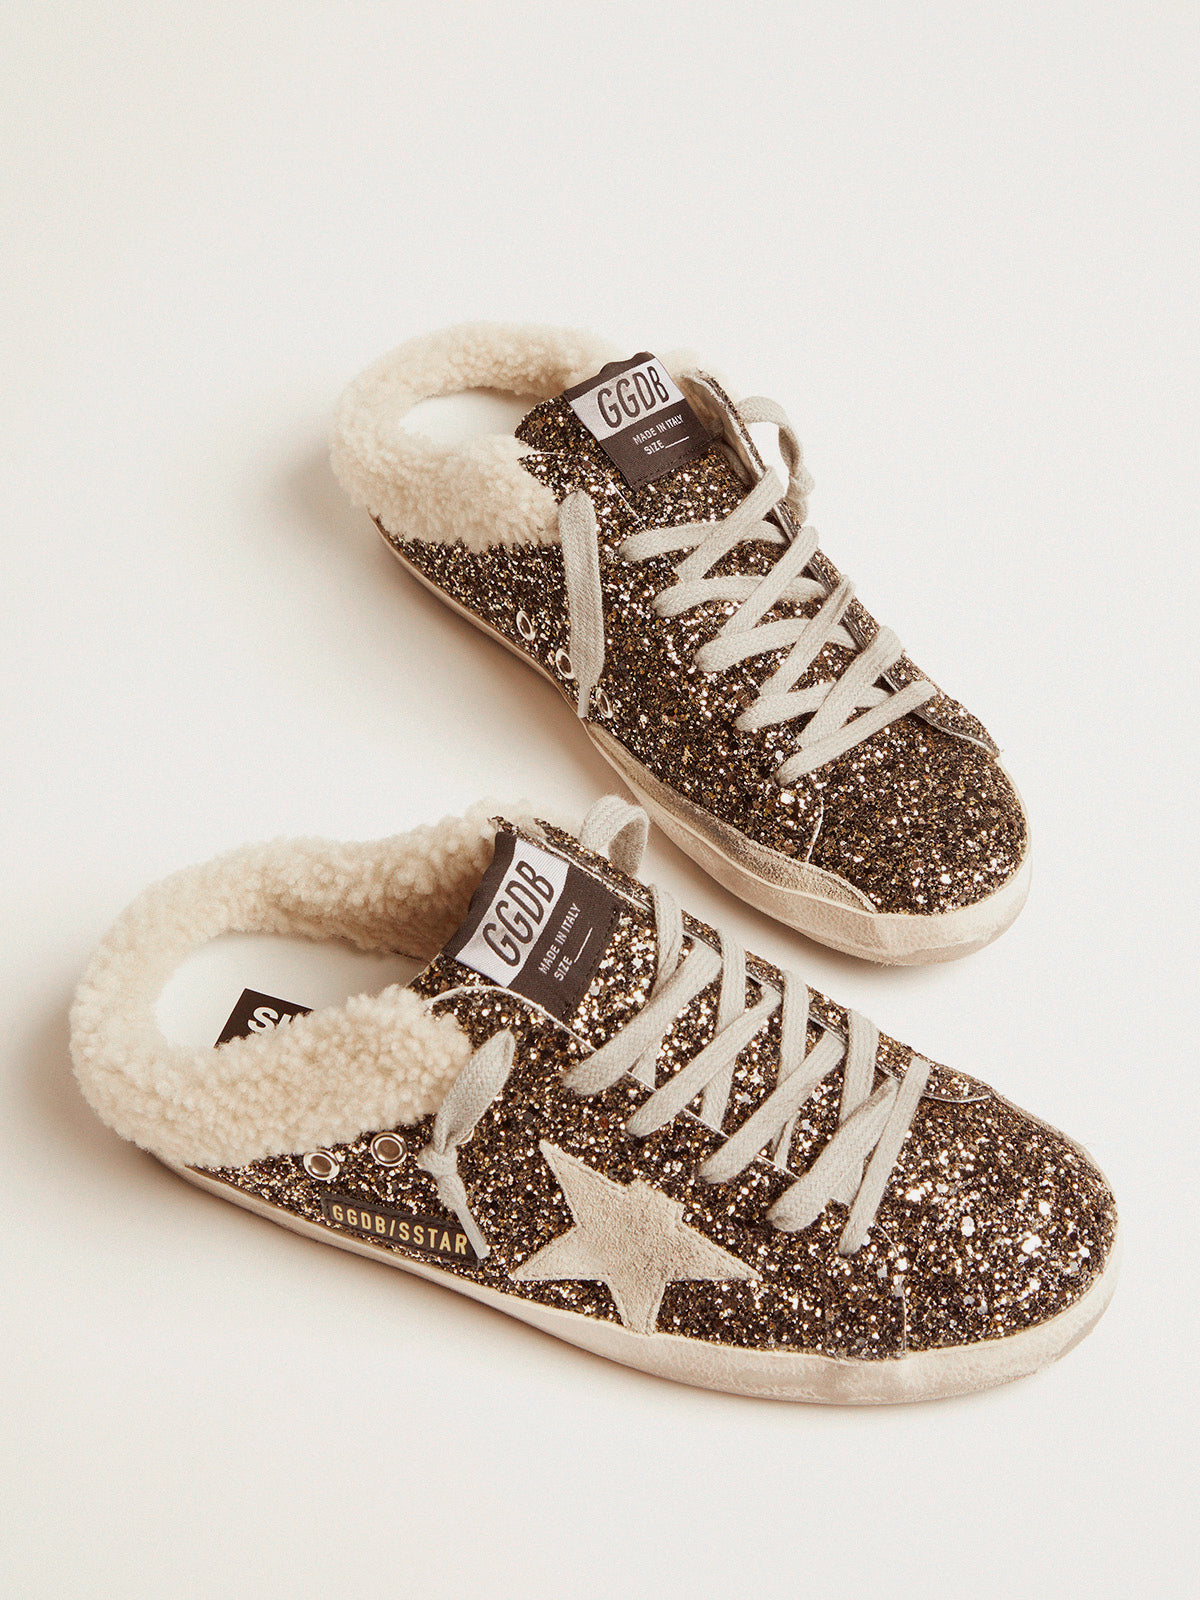 Golden Goose Superstar Sabot Glitter Sneakers in Black Gold, Beige and Ice available at The New Trend